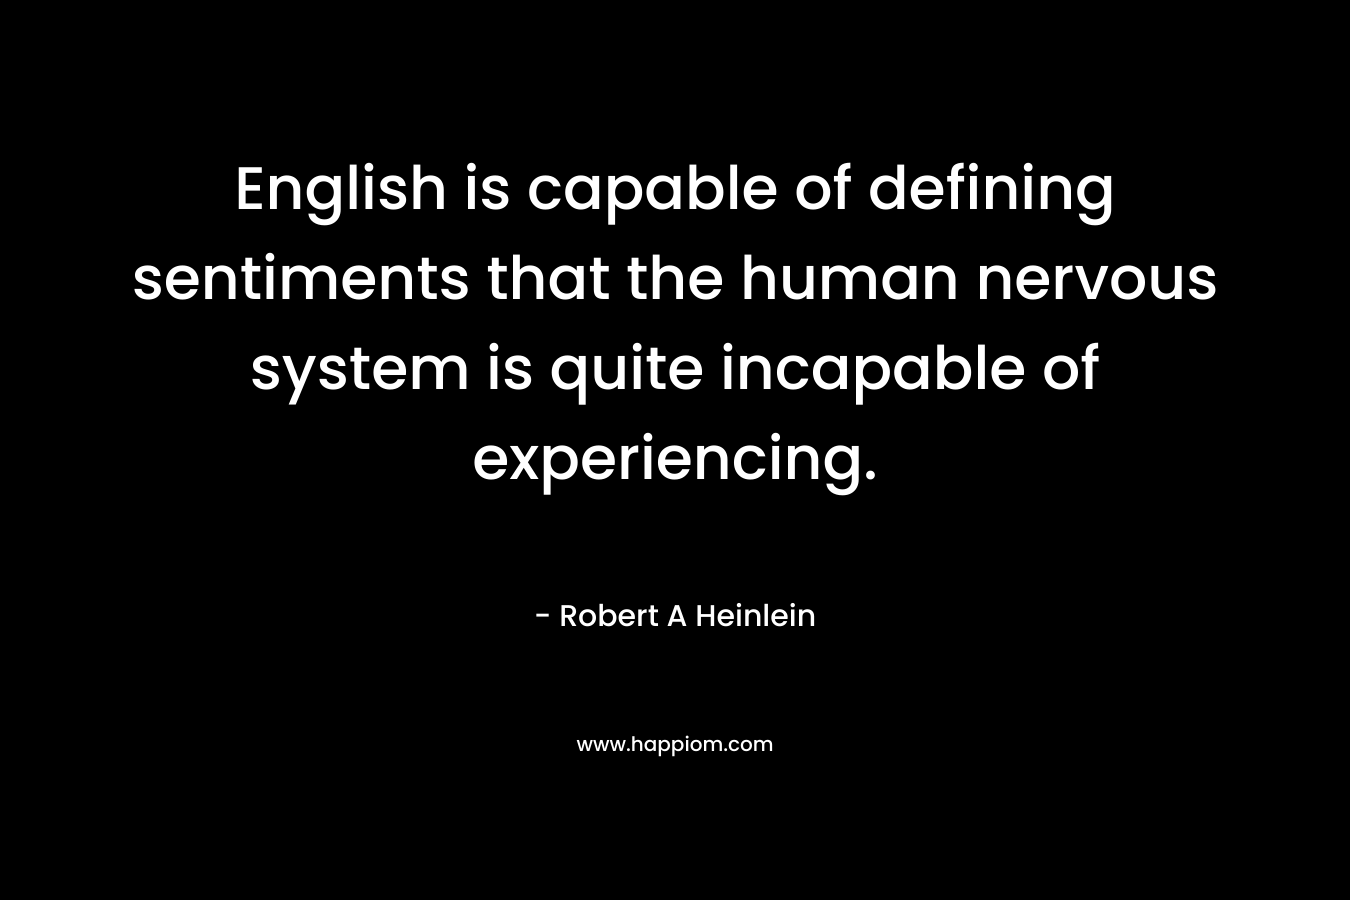 English is capable of defining sentiments that the human nervous system is quite incapable of experiencing.